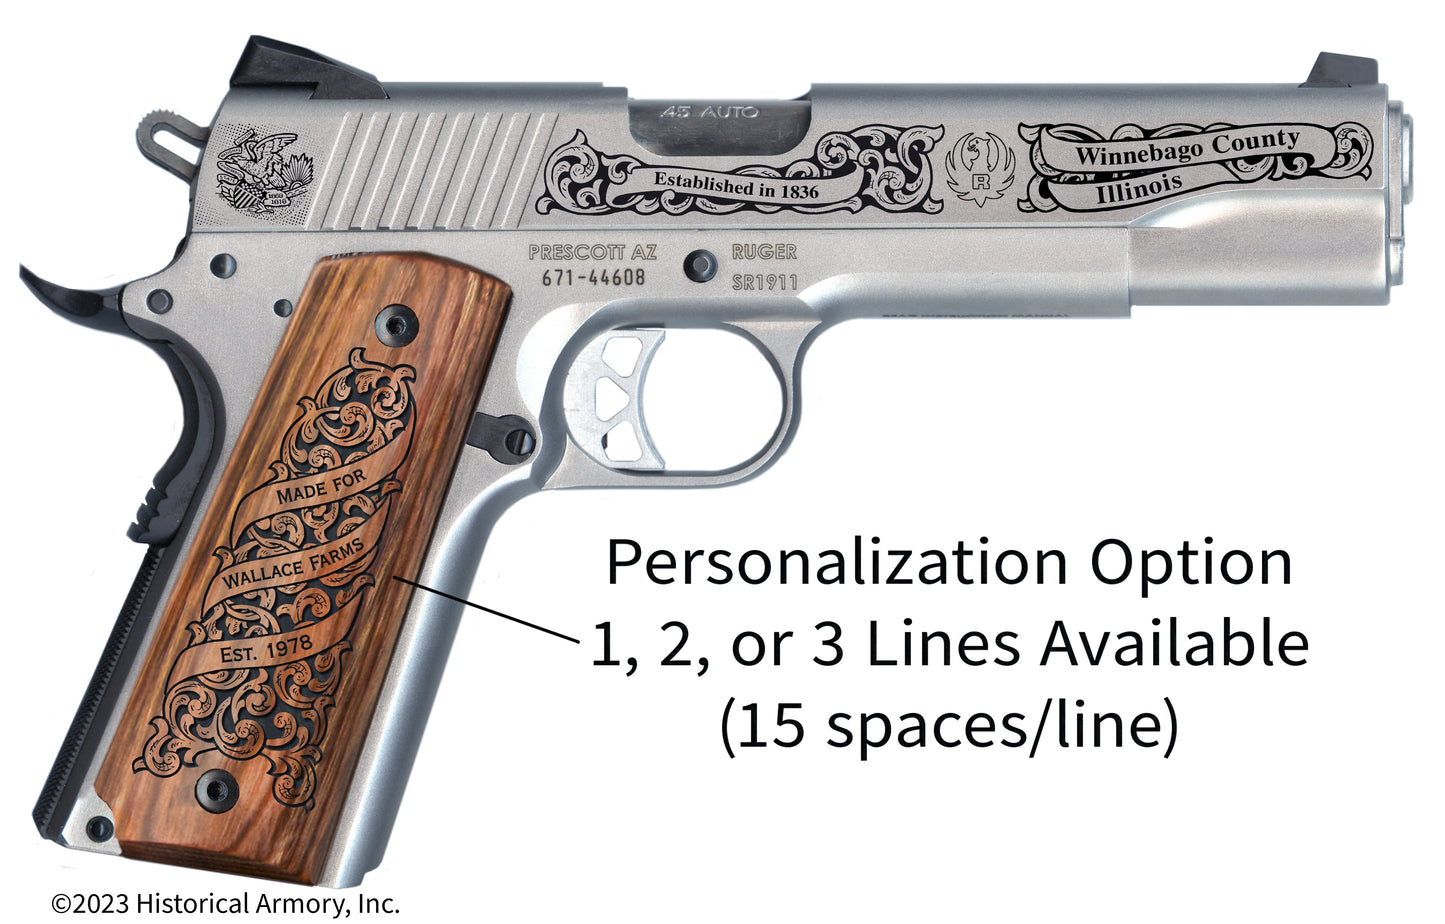 Winnebago County Illinois Personalized Engraved .45 Auto Ruger 1911